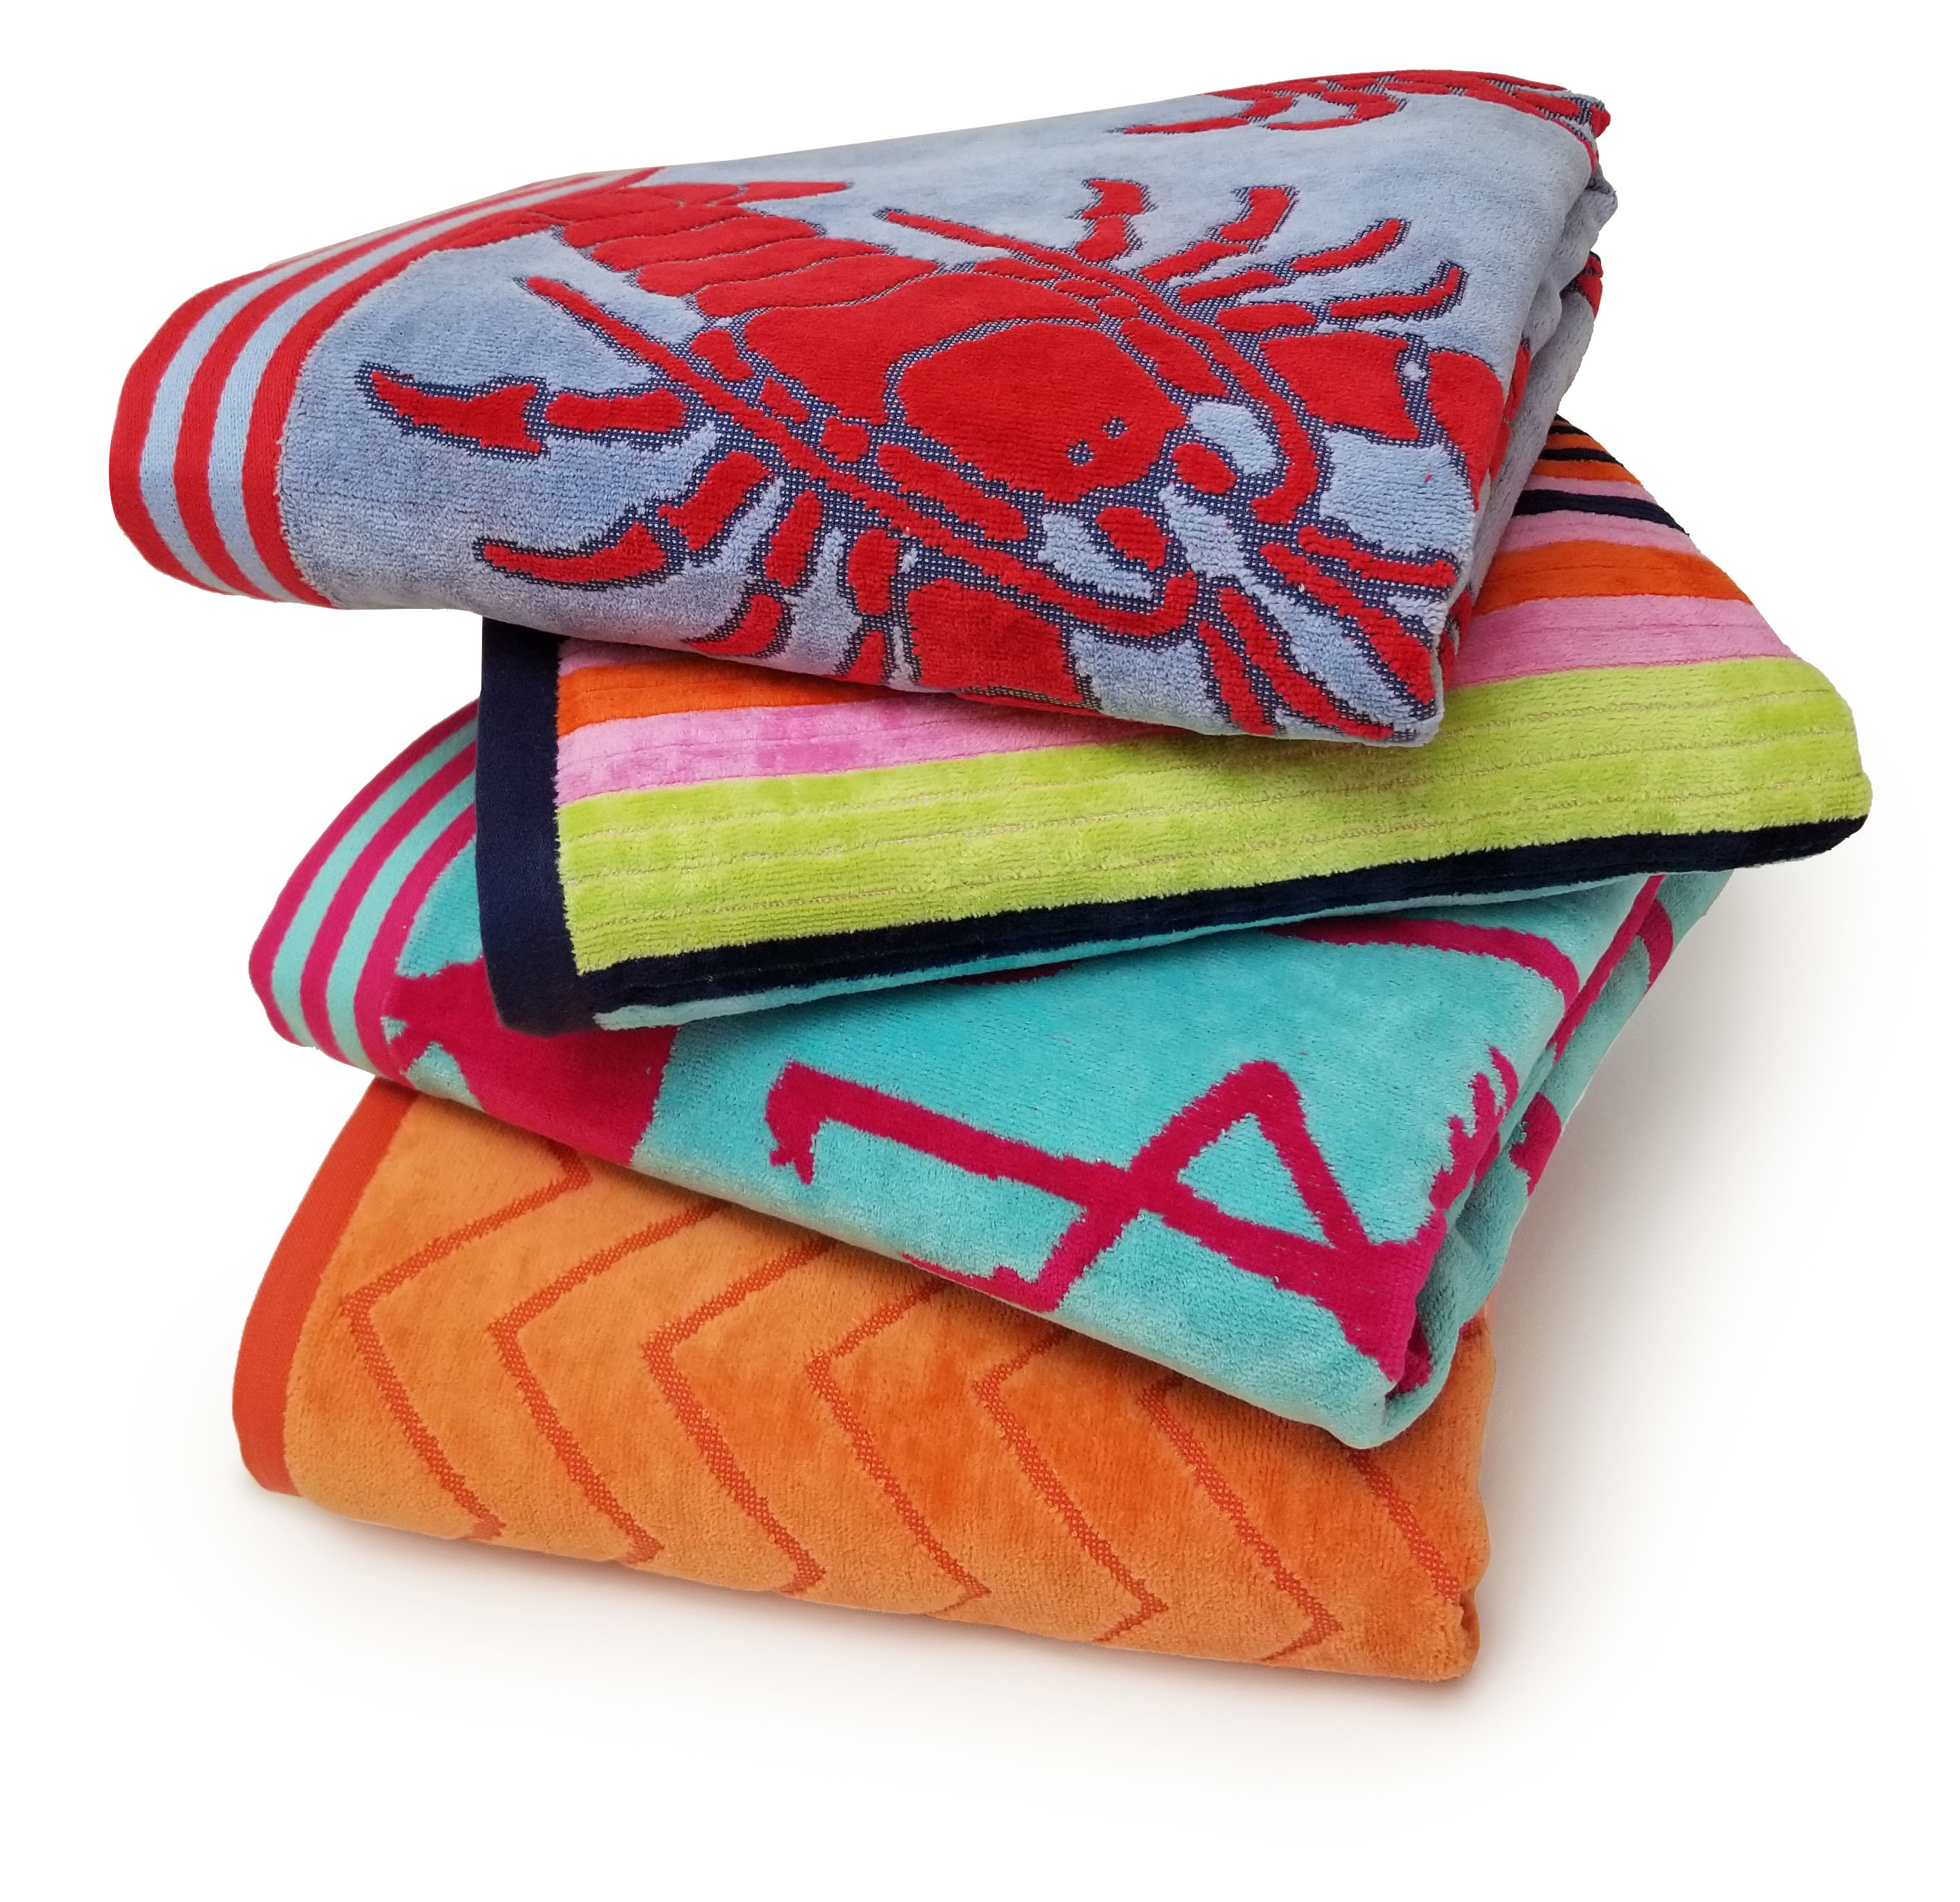 Over-Sized Designer Jacquard Printed Beach Towels Super Quality and Very Absorbent Towel in Beautiful Colors By Maya Island 